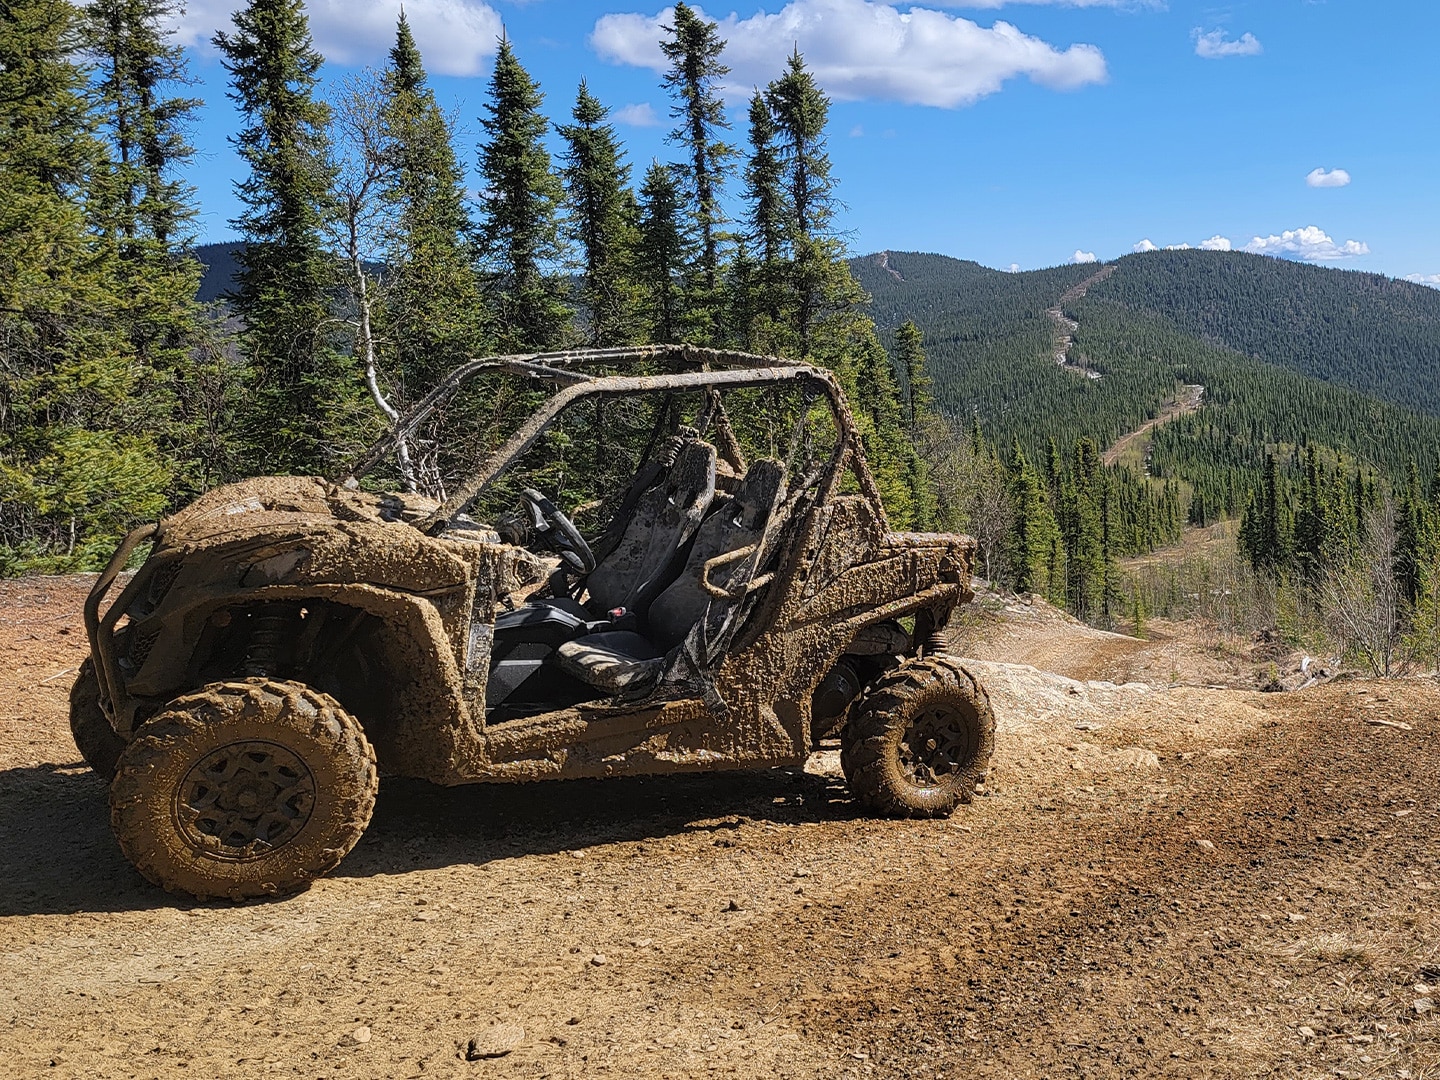 Morning off-road exploration in Fairbanks, AK